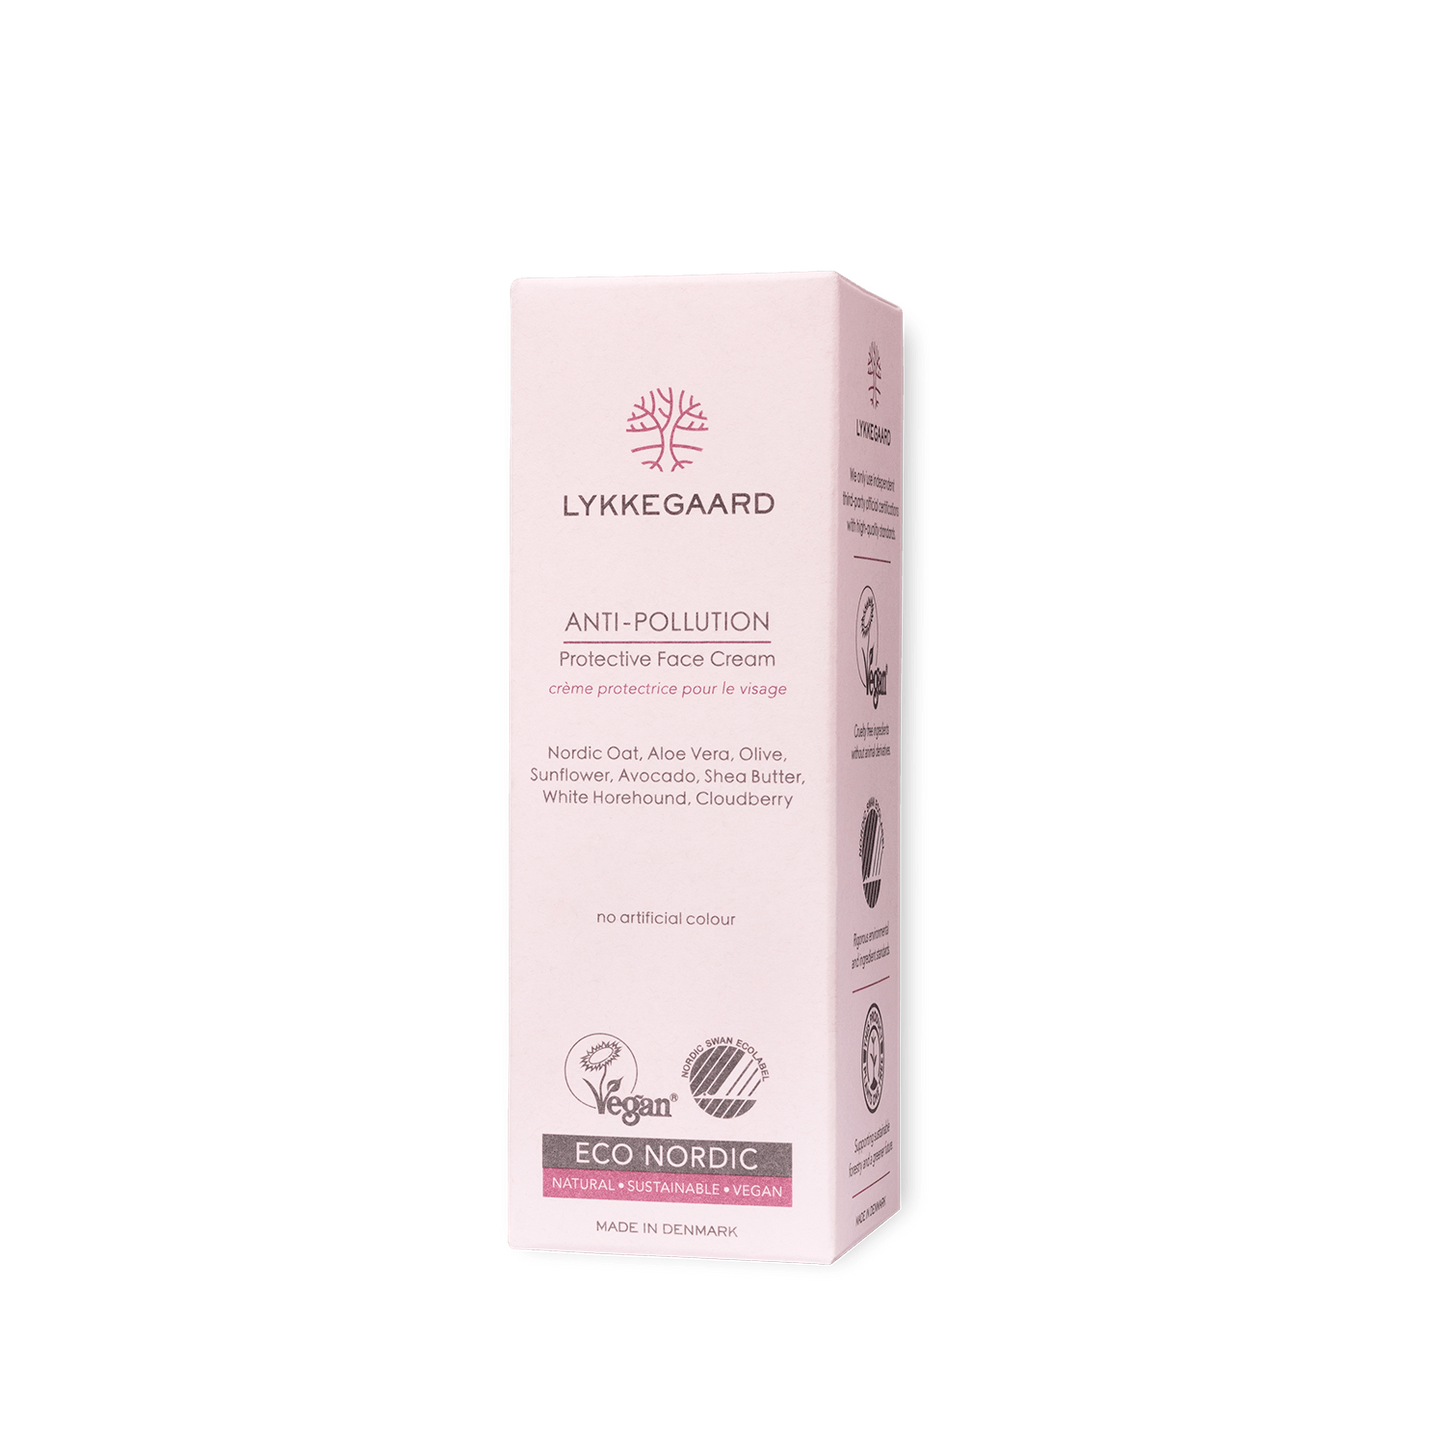 ANTI-POLLUTION Protective Face Cream - LYKKEGAARD